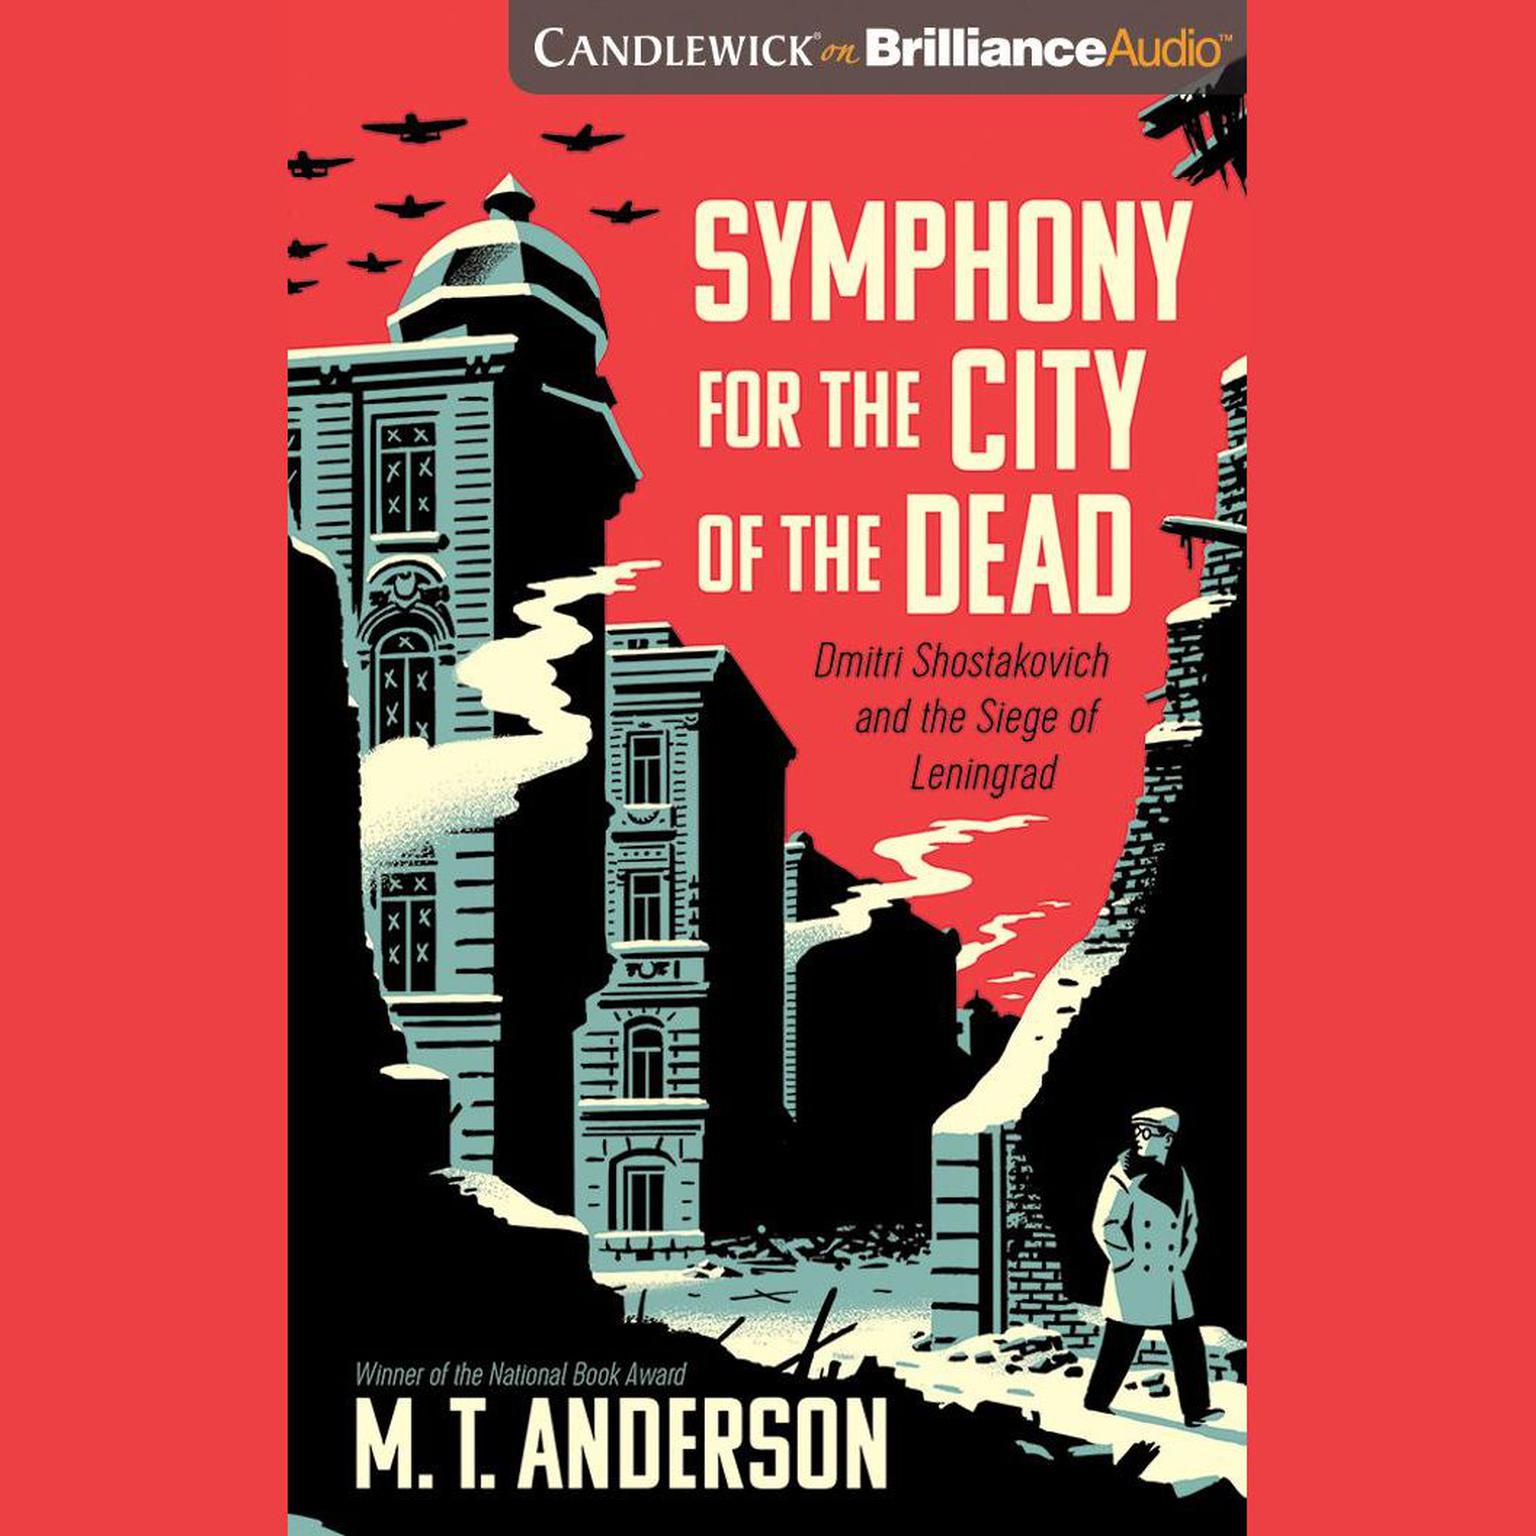 Symphony for the City of the Dead: Dmitri Shostakovich and the Siege of Leningrad Audiobook, by M. T. Anderson